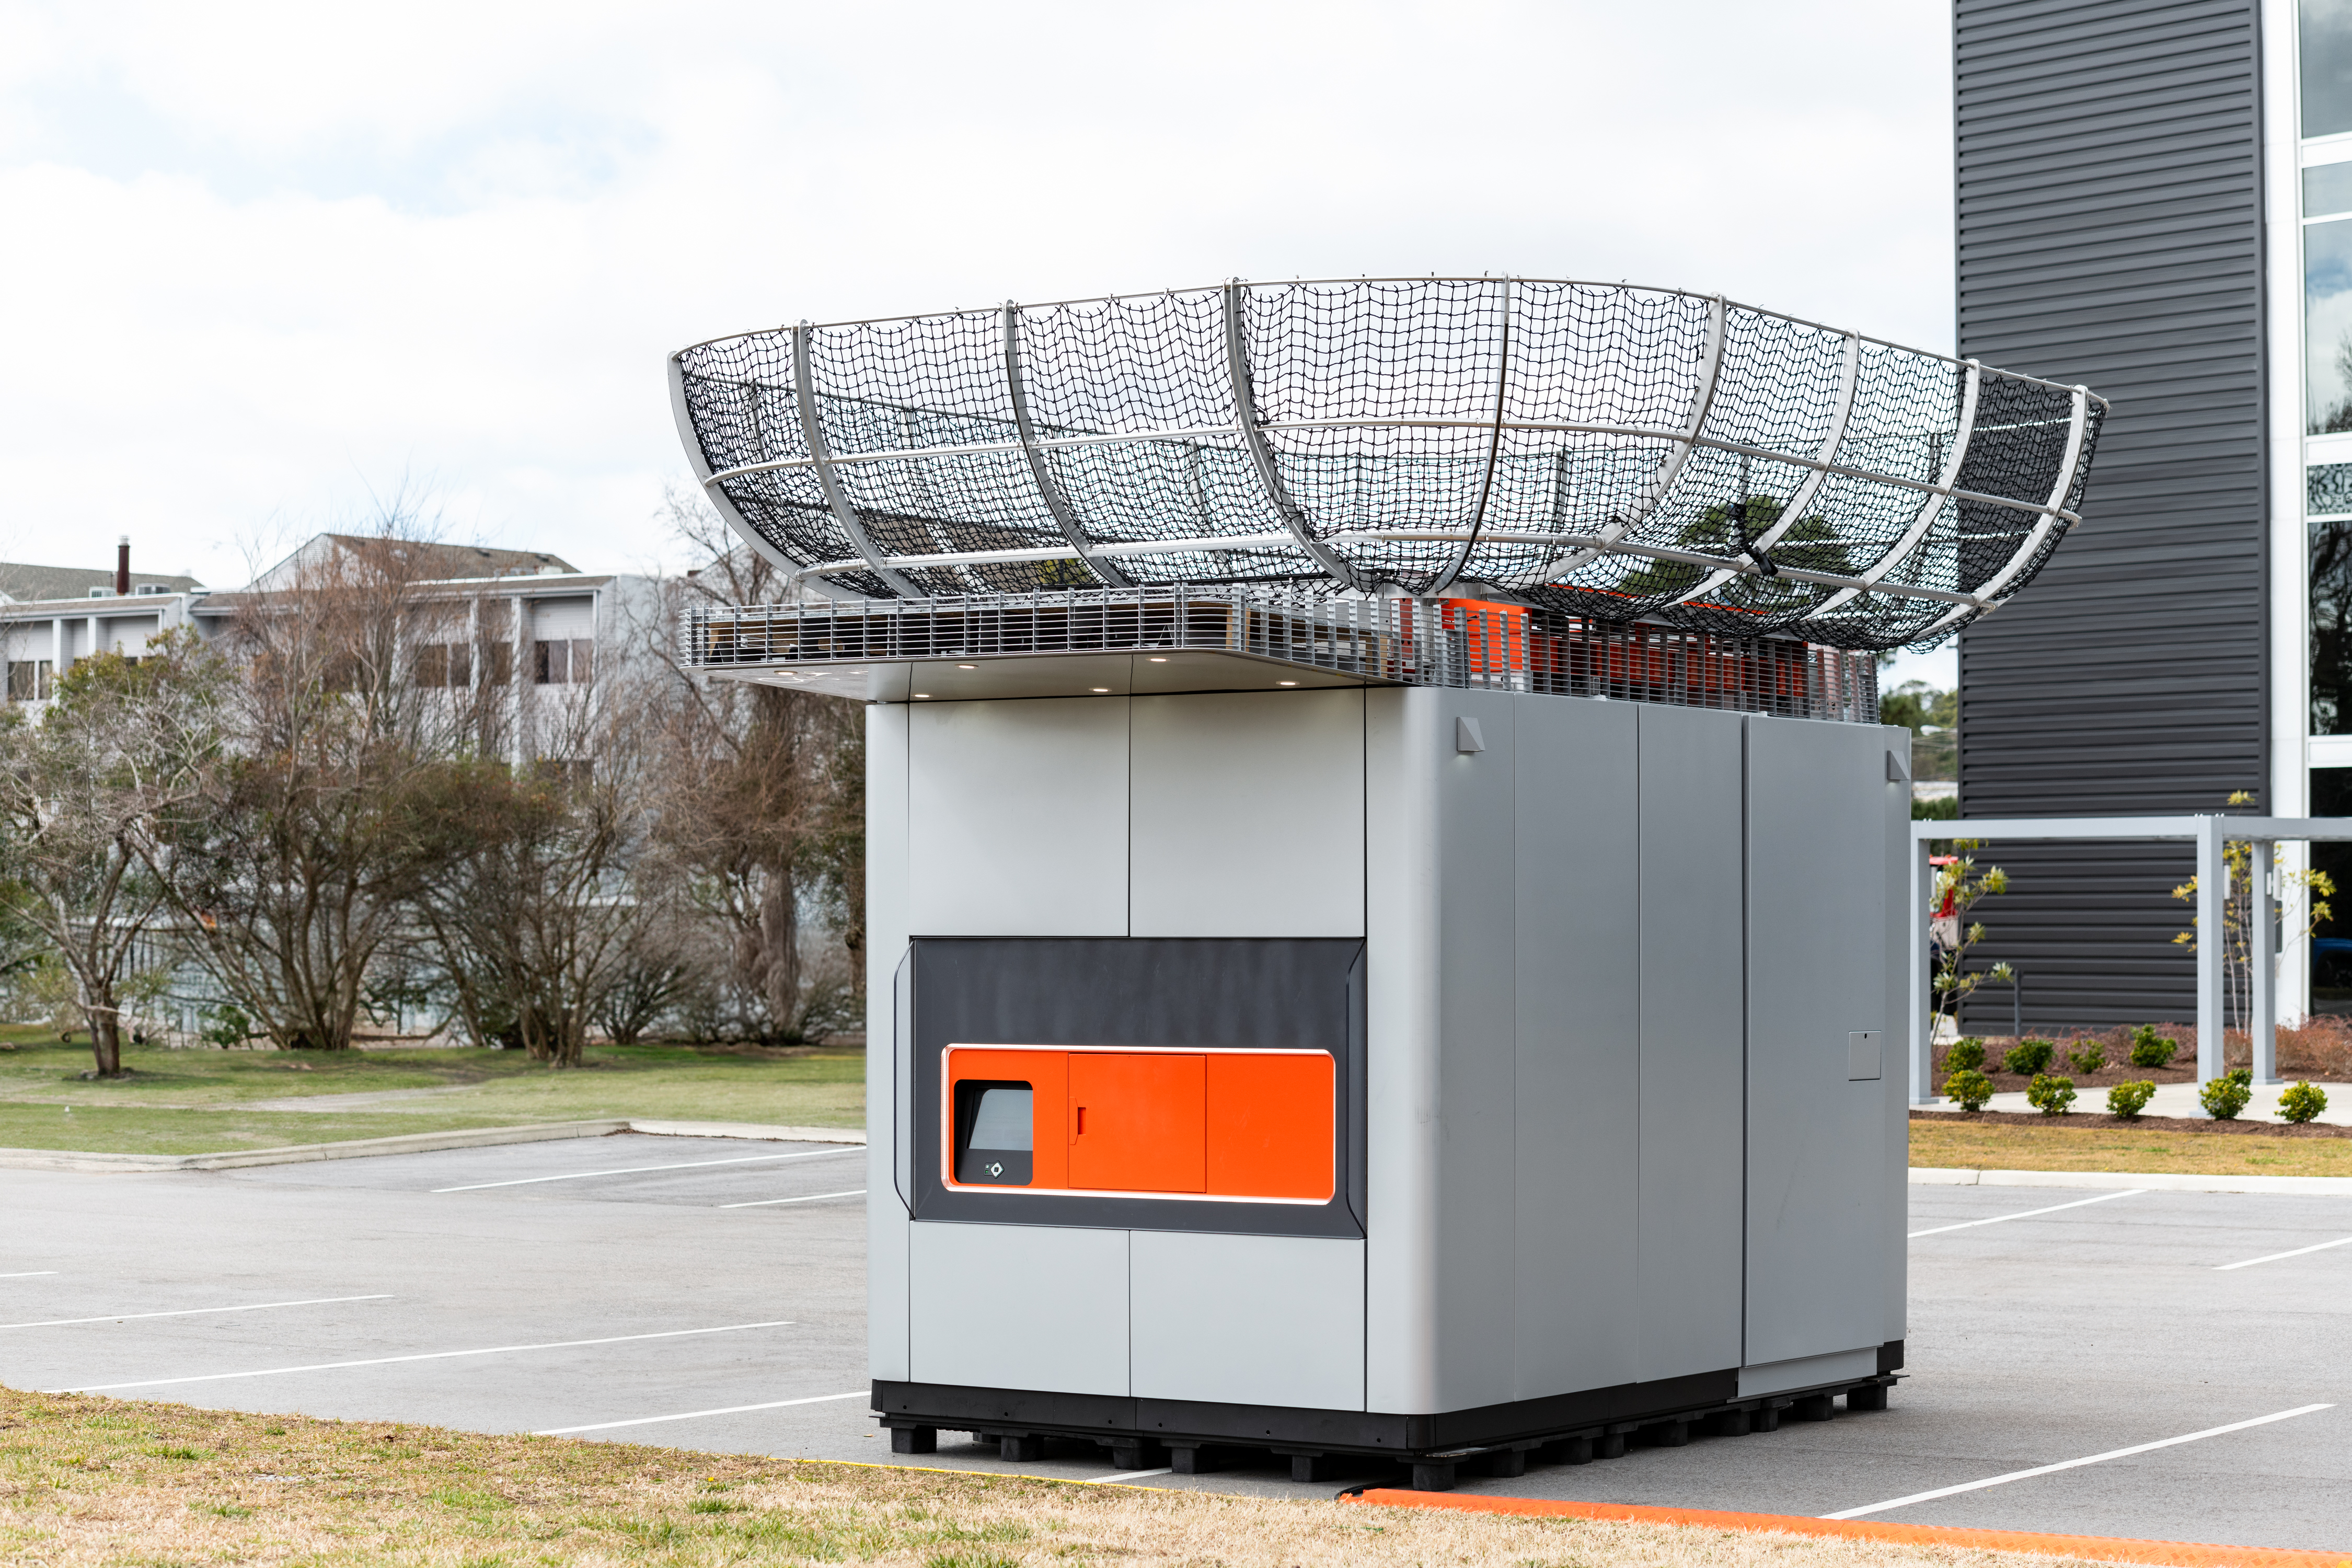 A DroneUp DBX robotic storage kiosk for package pickup and delivery